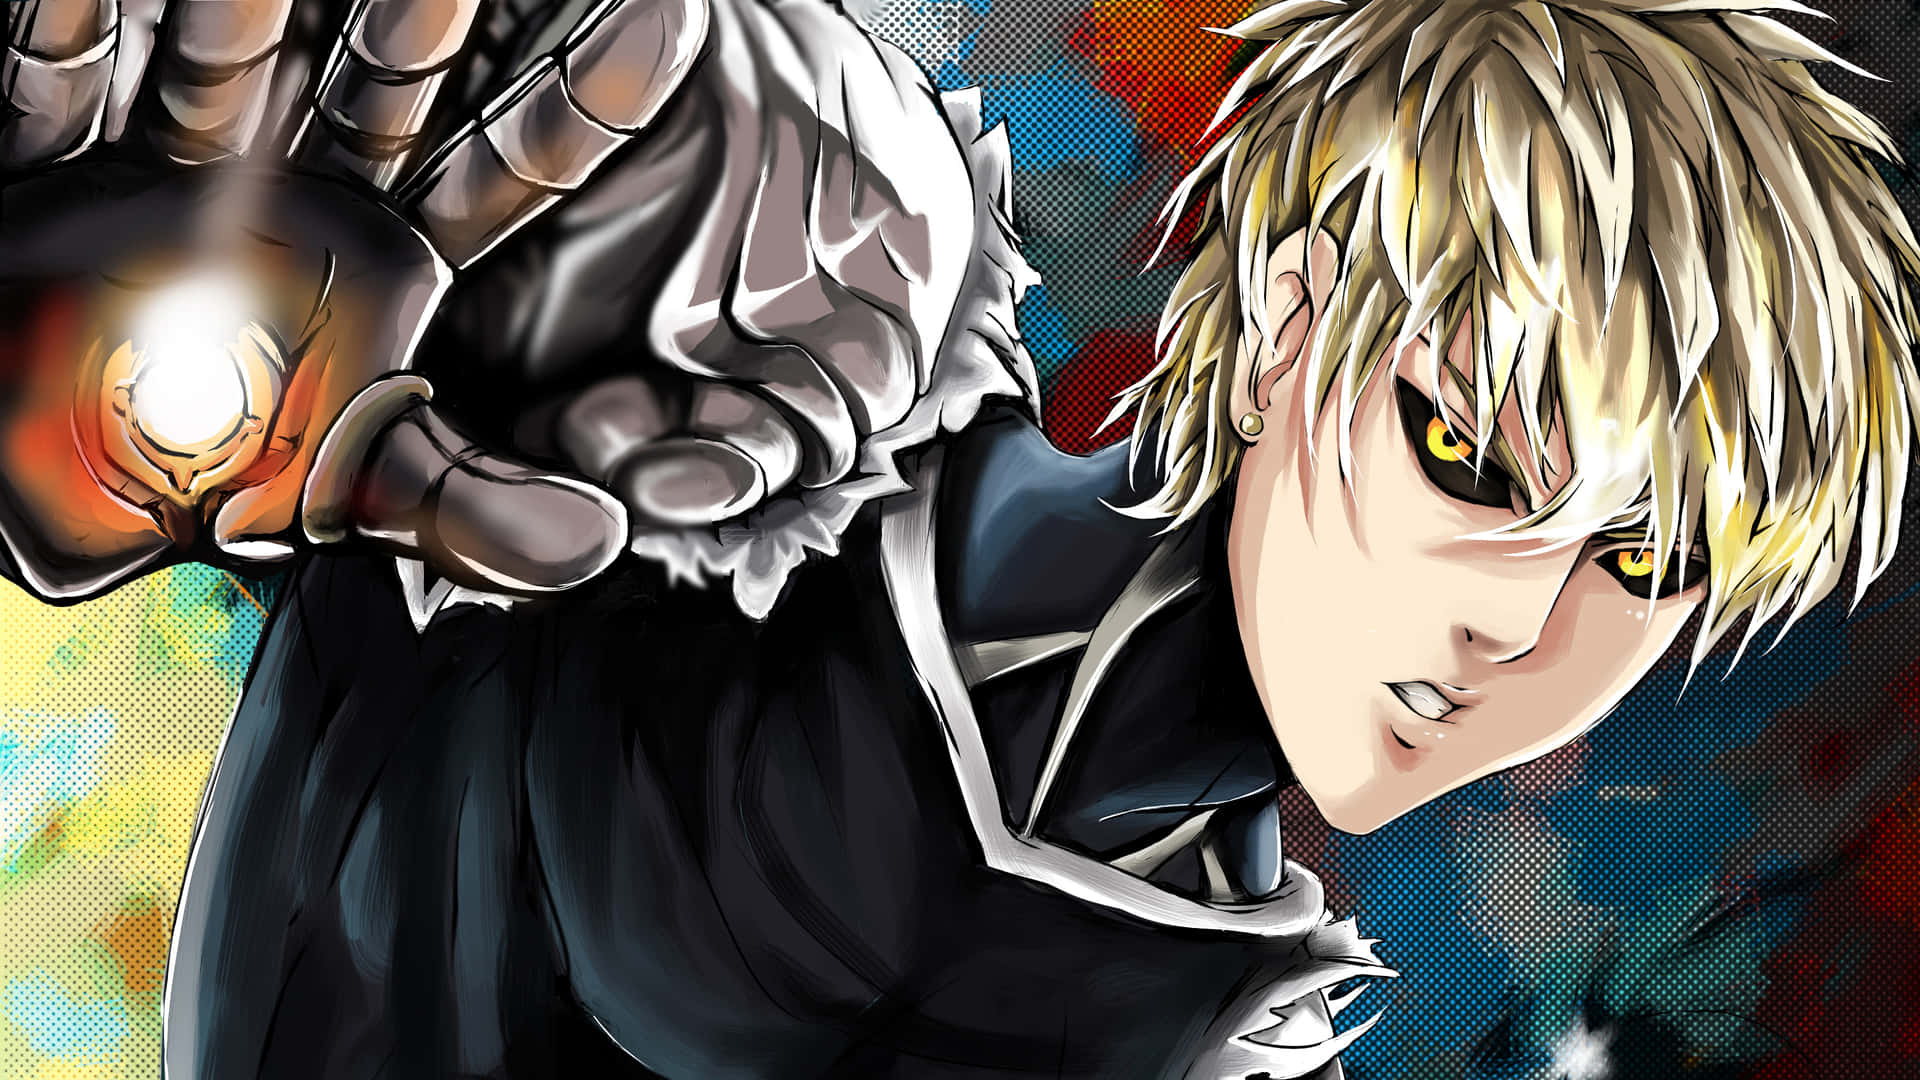 Genos - A mighty hero standing strong and determined Wallpaper